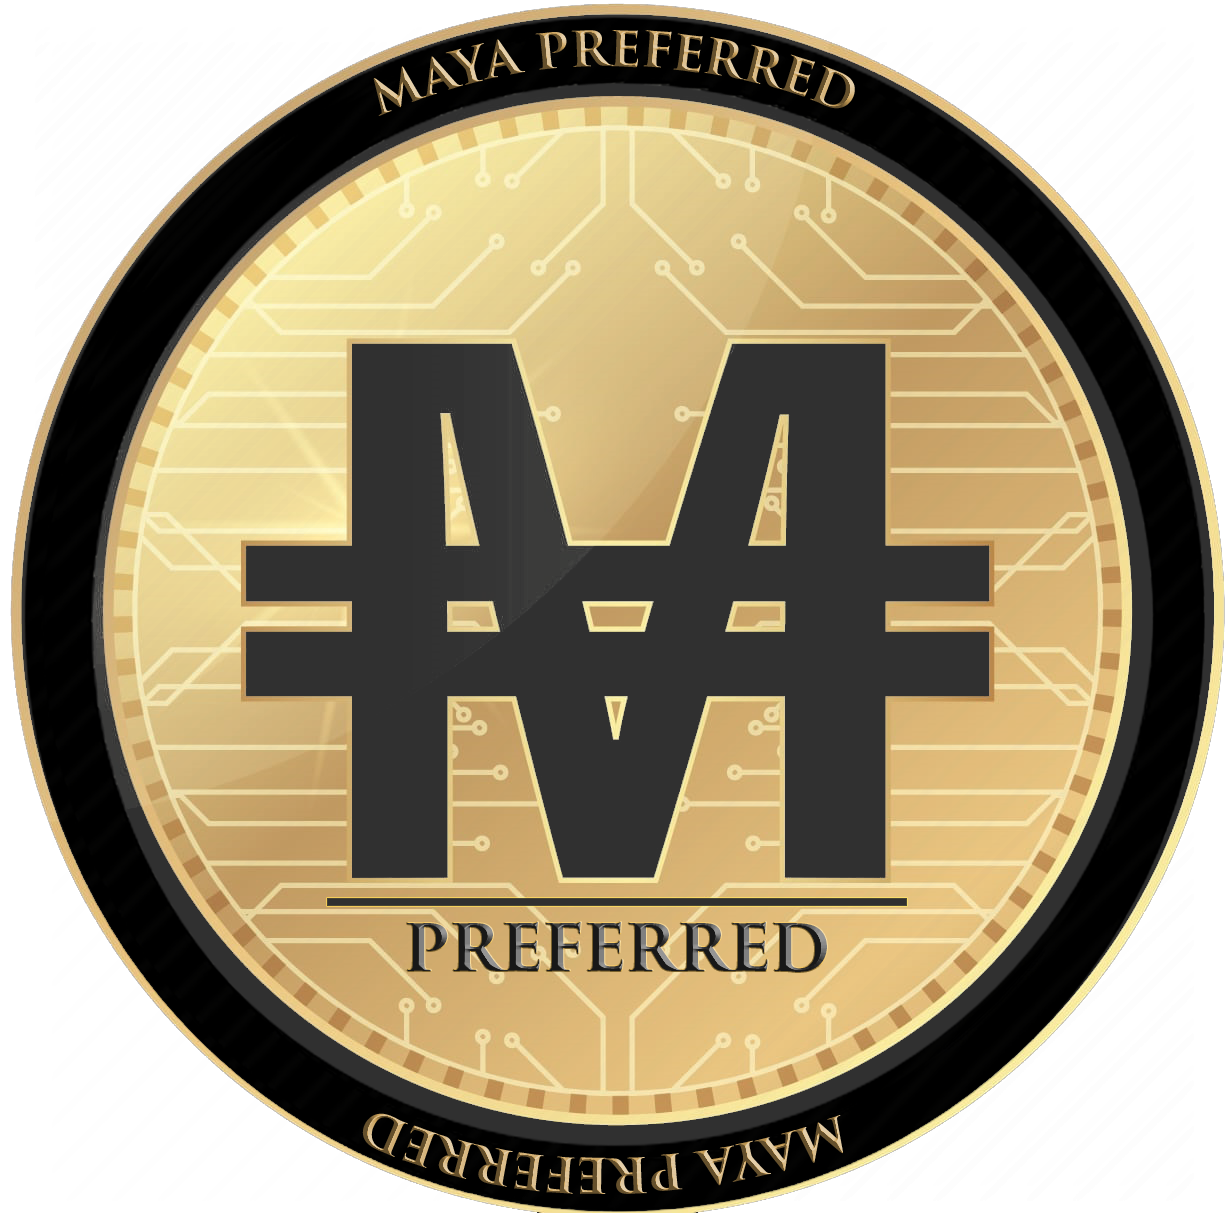 All media sites are talking about Maya Preferred 223 and its Bitcoin gold and silver backing.